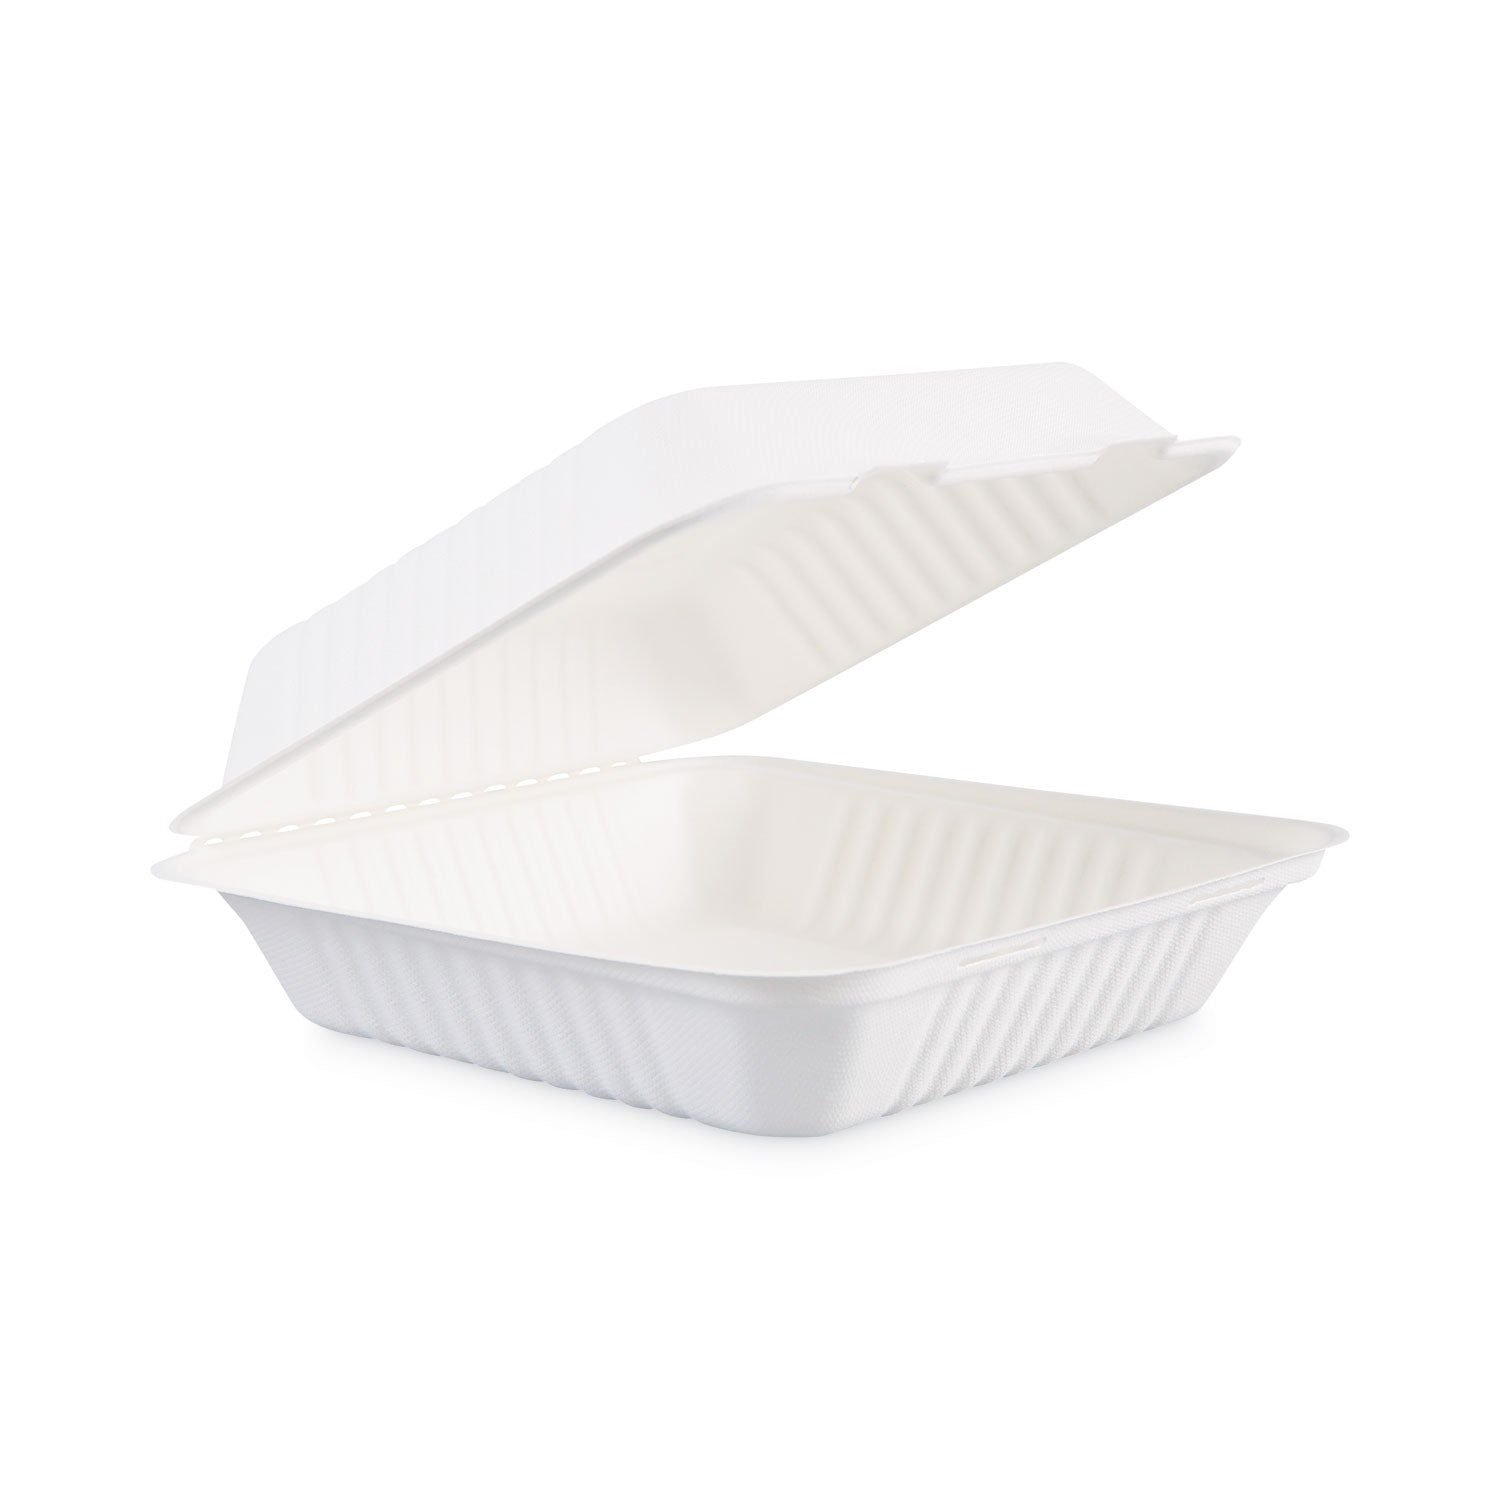 bagasse-food-containers-hinged-lid-1-compartment-9-x-9-x-319-white-sugarcane-100-sleeve-2-sleeves-carton_bwkhingewf1cm9 - 1